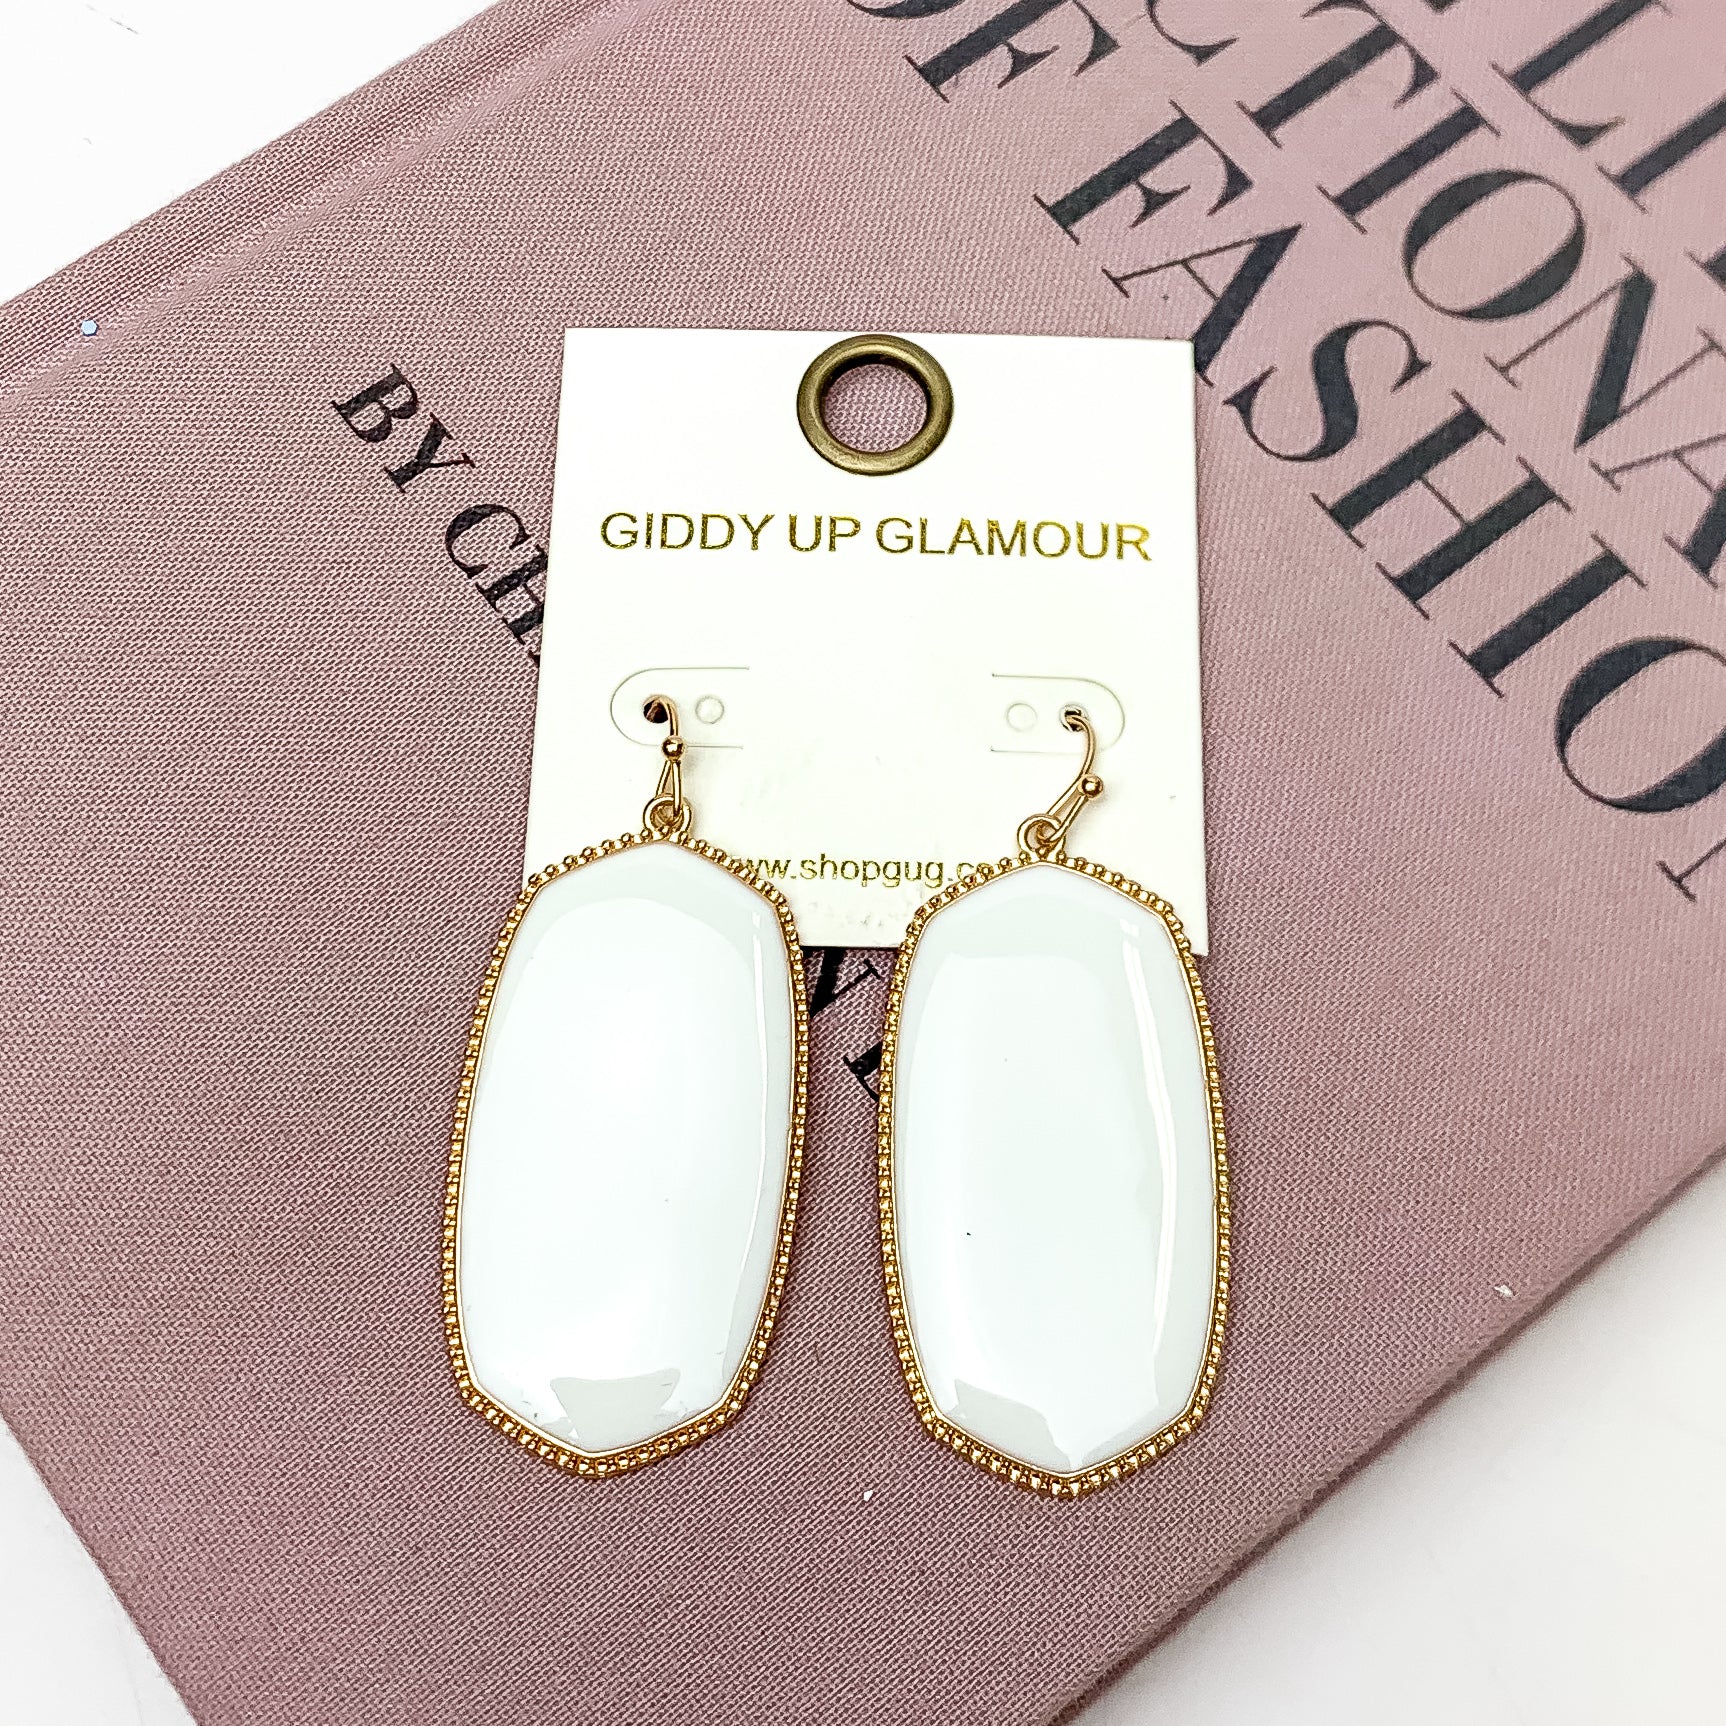 Southern Charm Oval Earrings in White. These earrings are laying on a pink book with a white background behind the book.